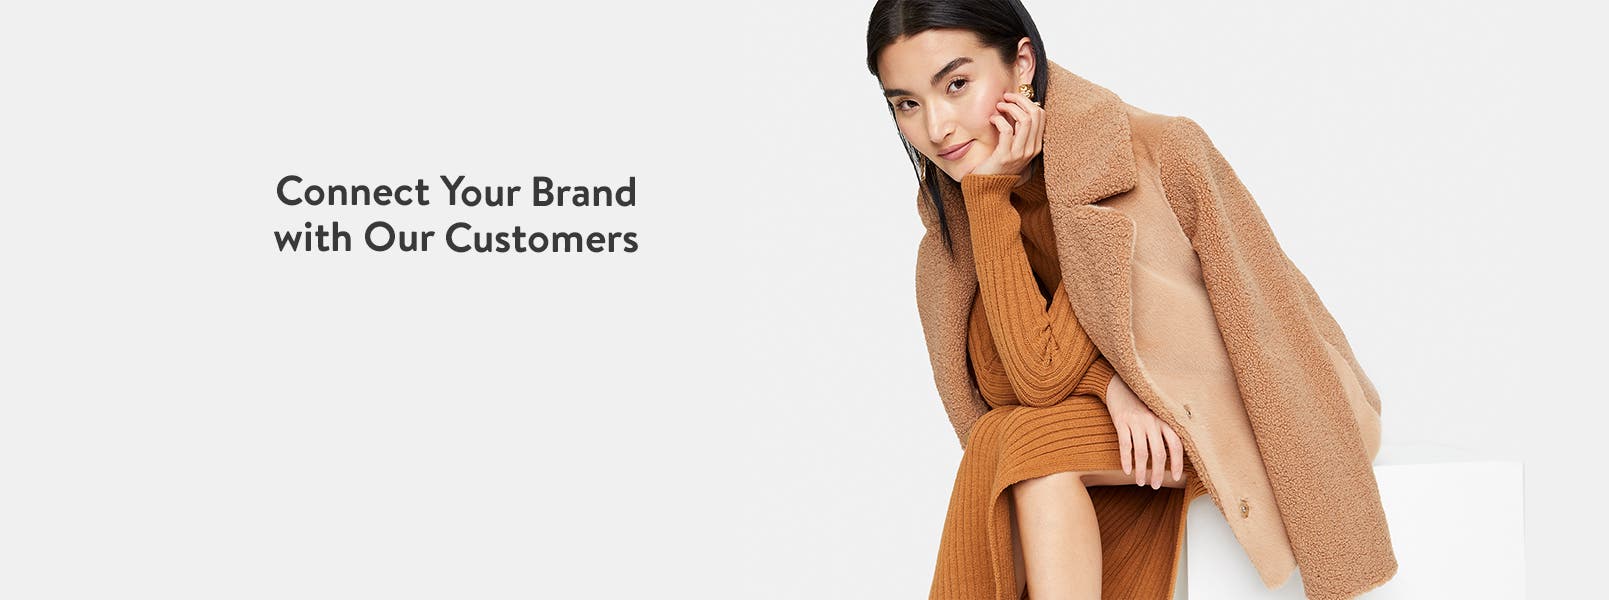 Connect Your Brand with Our Customers. A woman in fuzzy coat and sweaterdress.